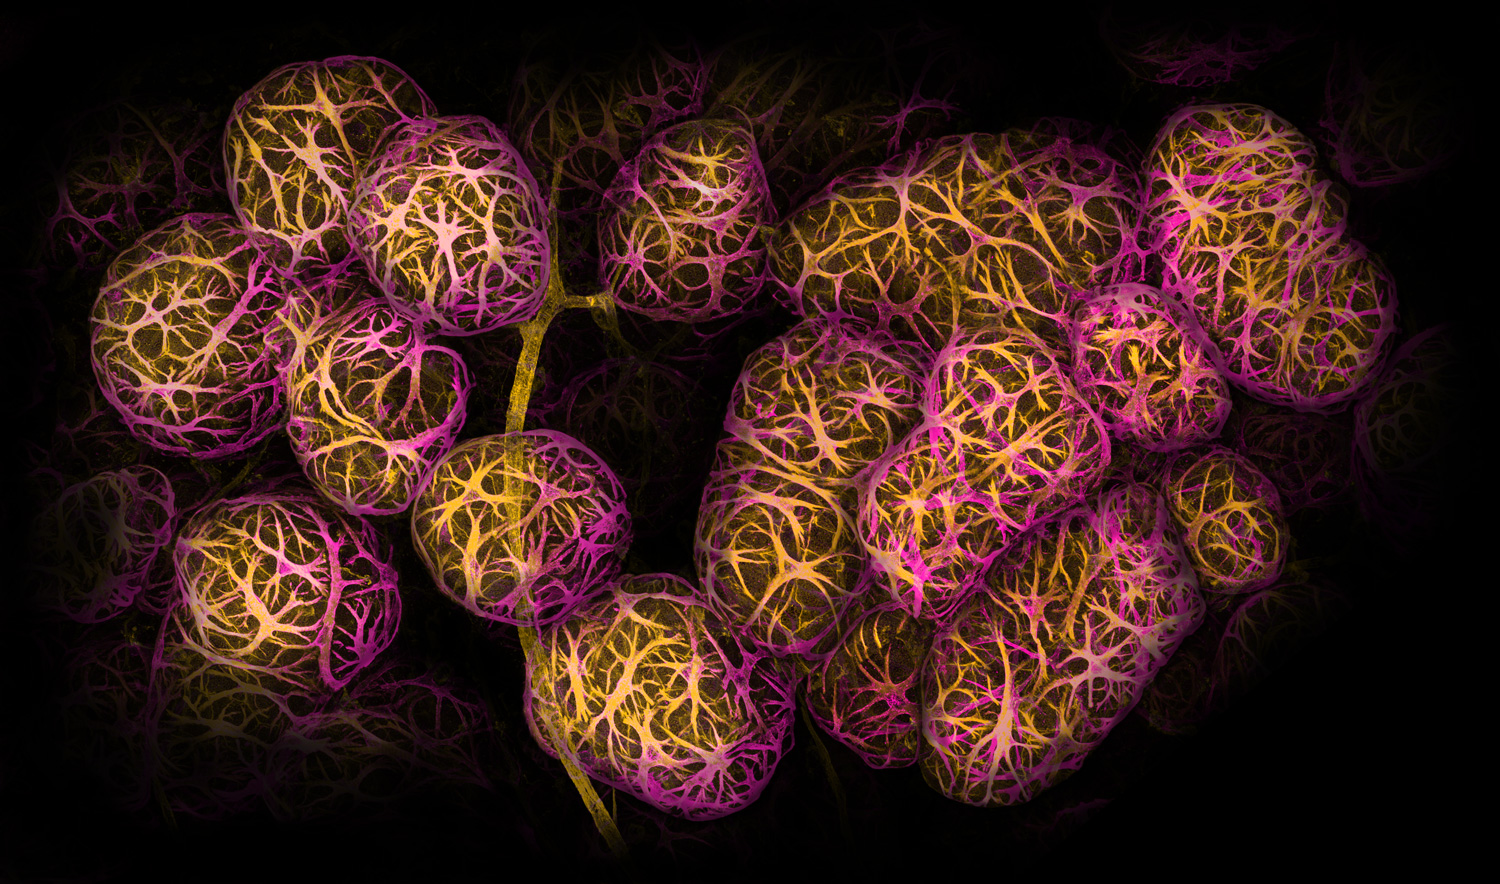 ball-like structures colored magenta and yellow clustered around a blood vessel, colored yellow, against a black backdrop